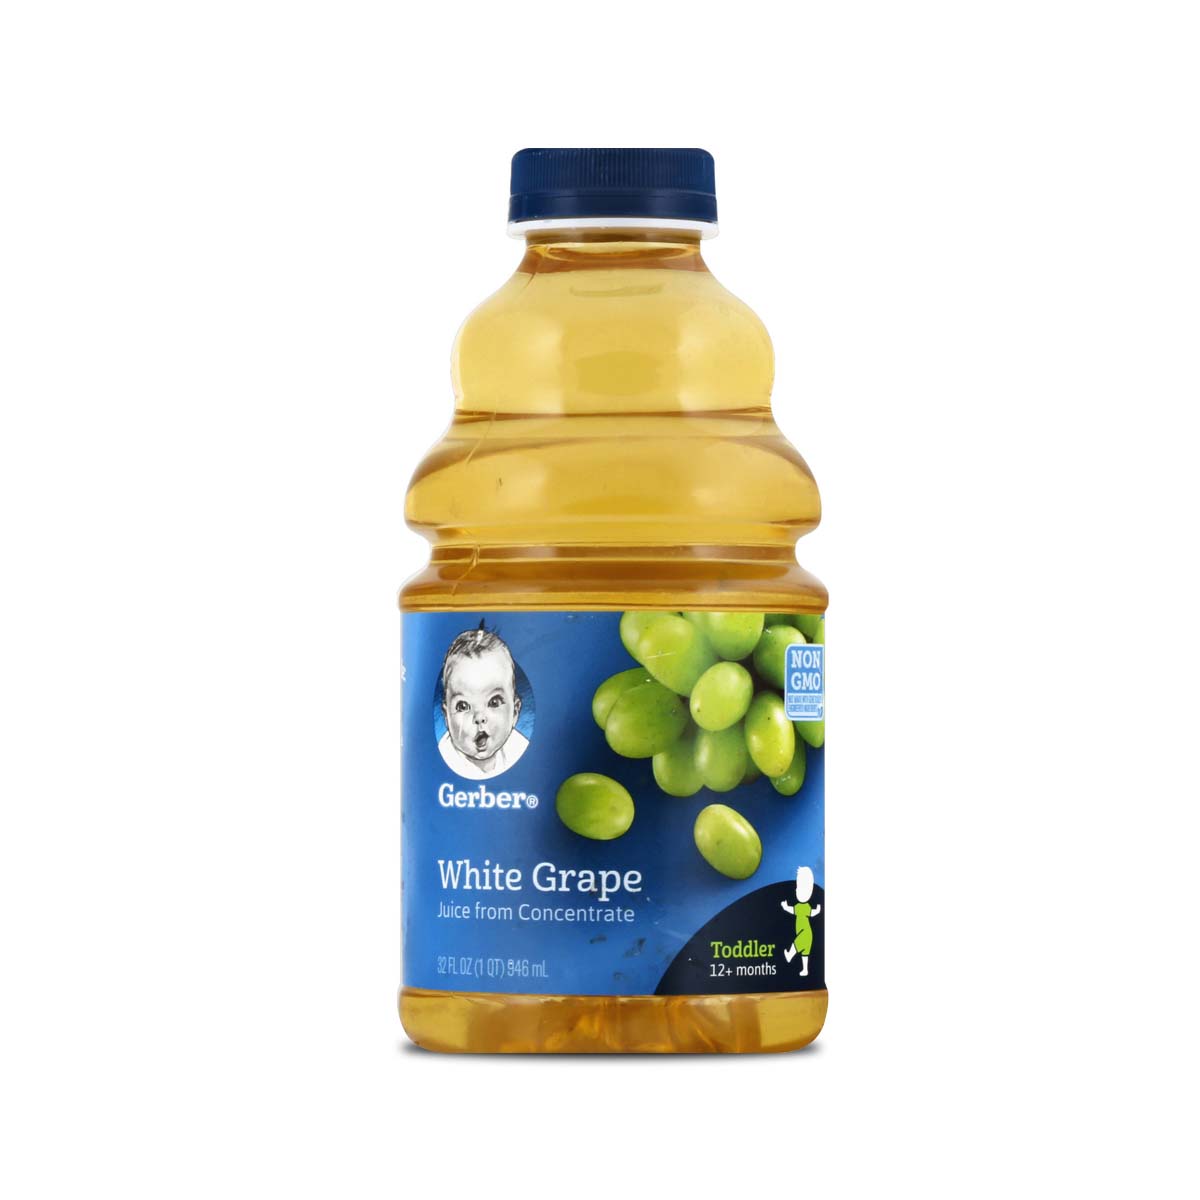 Buy Gerber White Grape Concentrate Fruit Pulp Juice for your Baby - 946ml Online in India at uyyaala.com